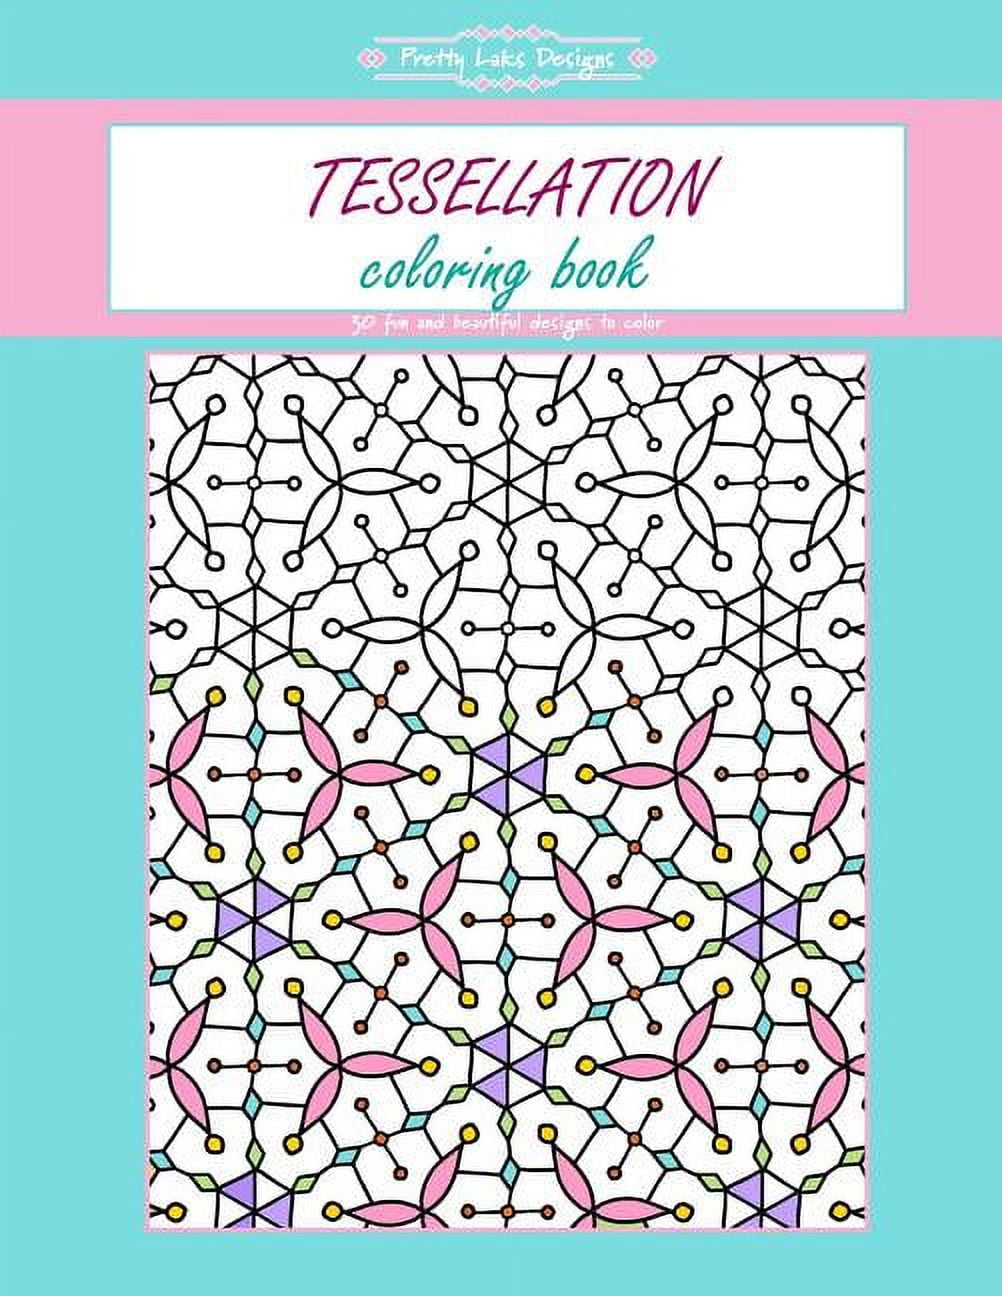 Tessellation coloring book coloring book gift for kids women adults everyone paperback pretty laks designs